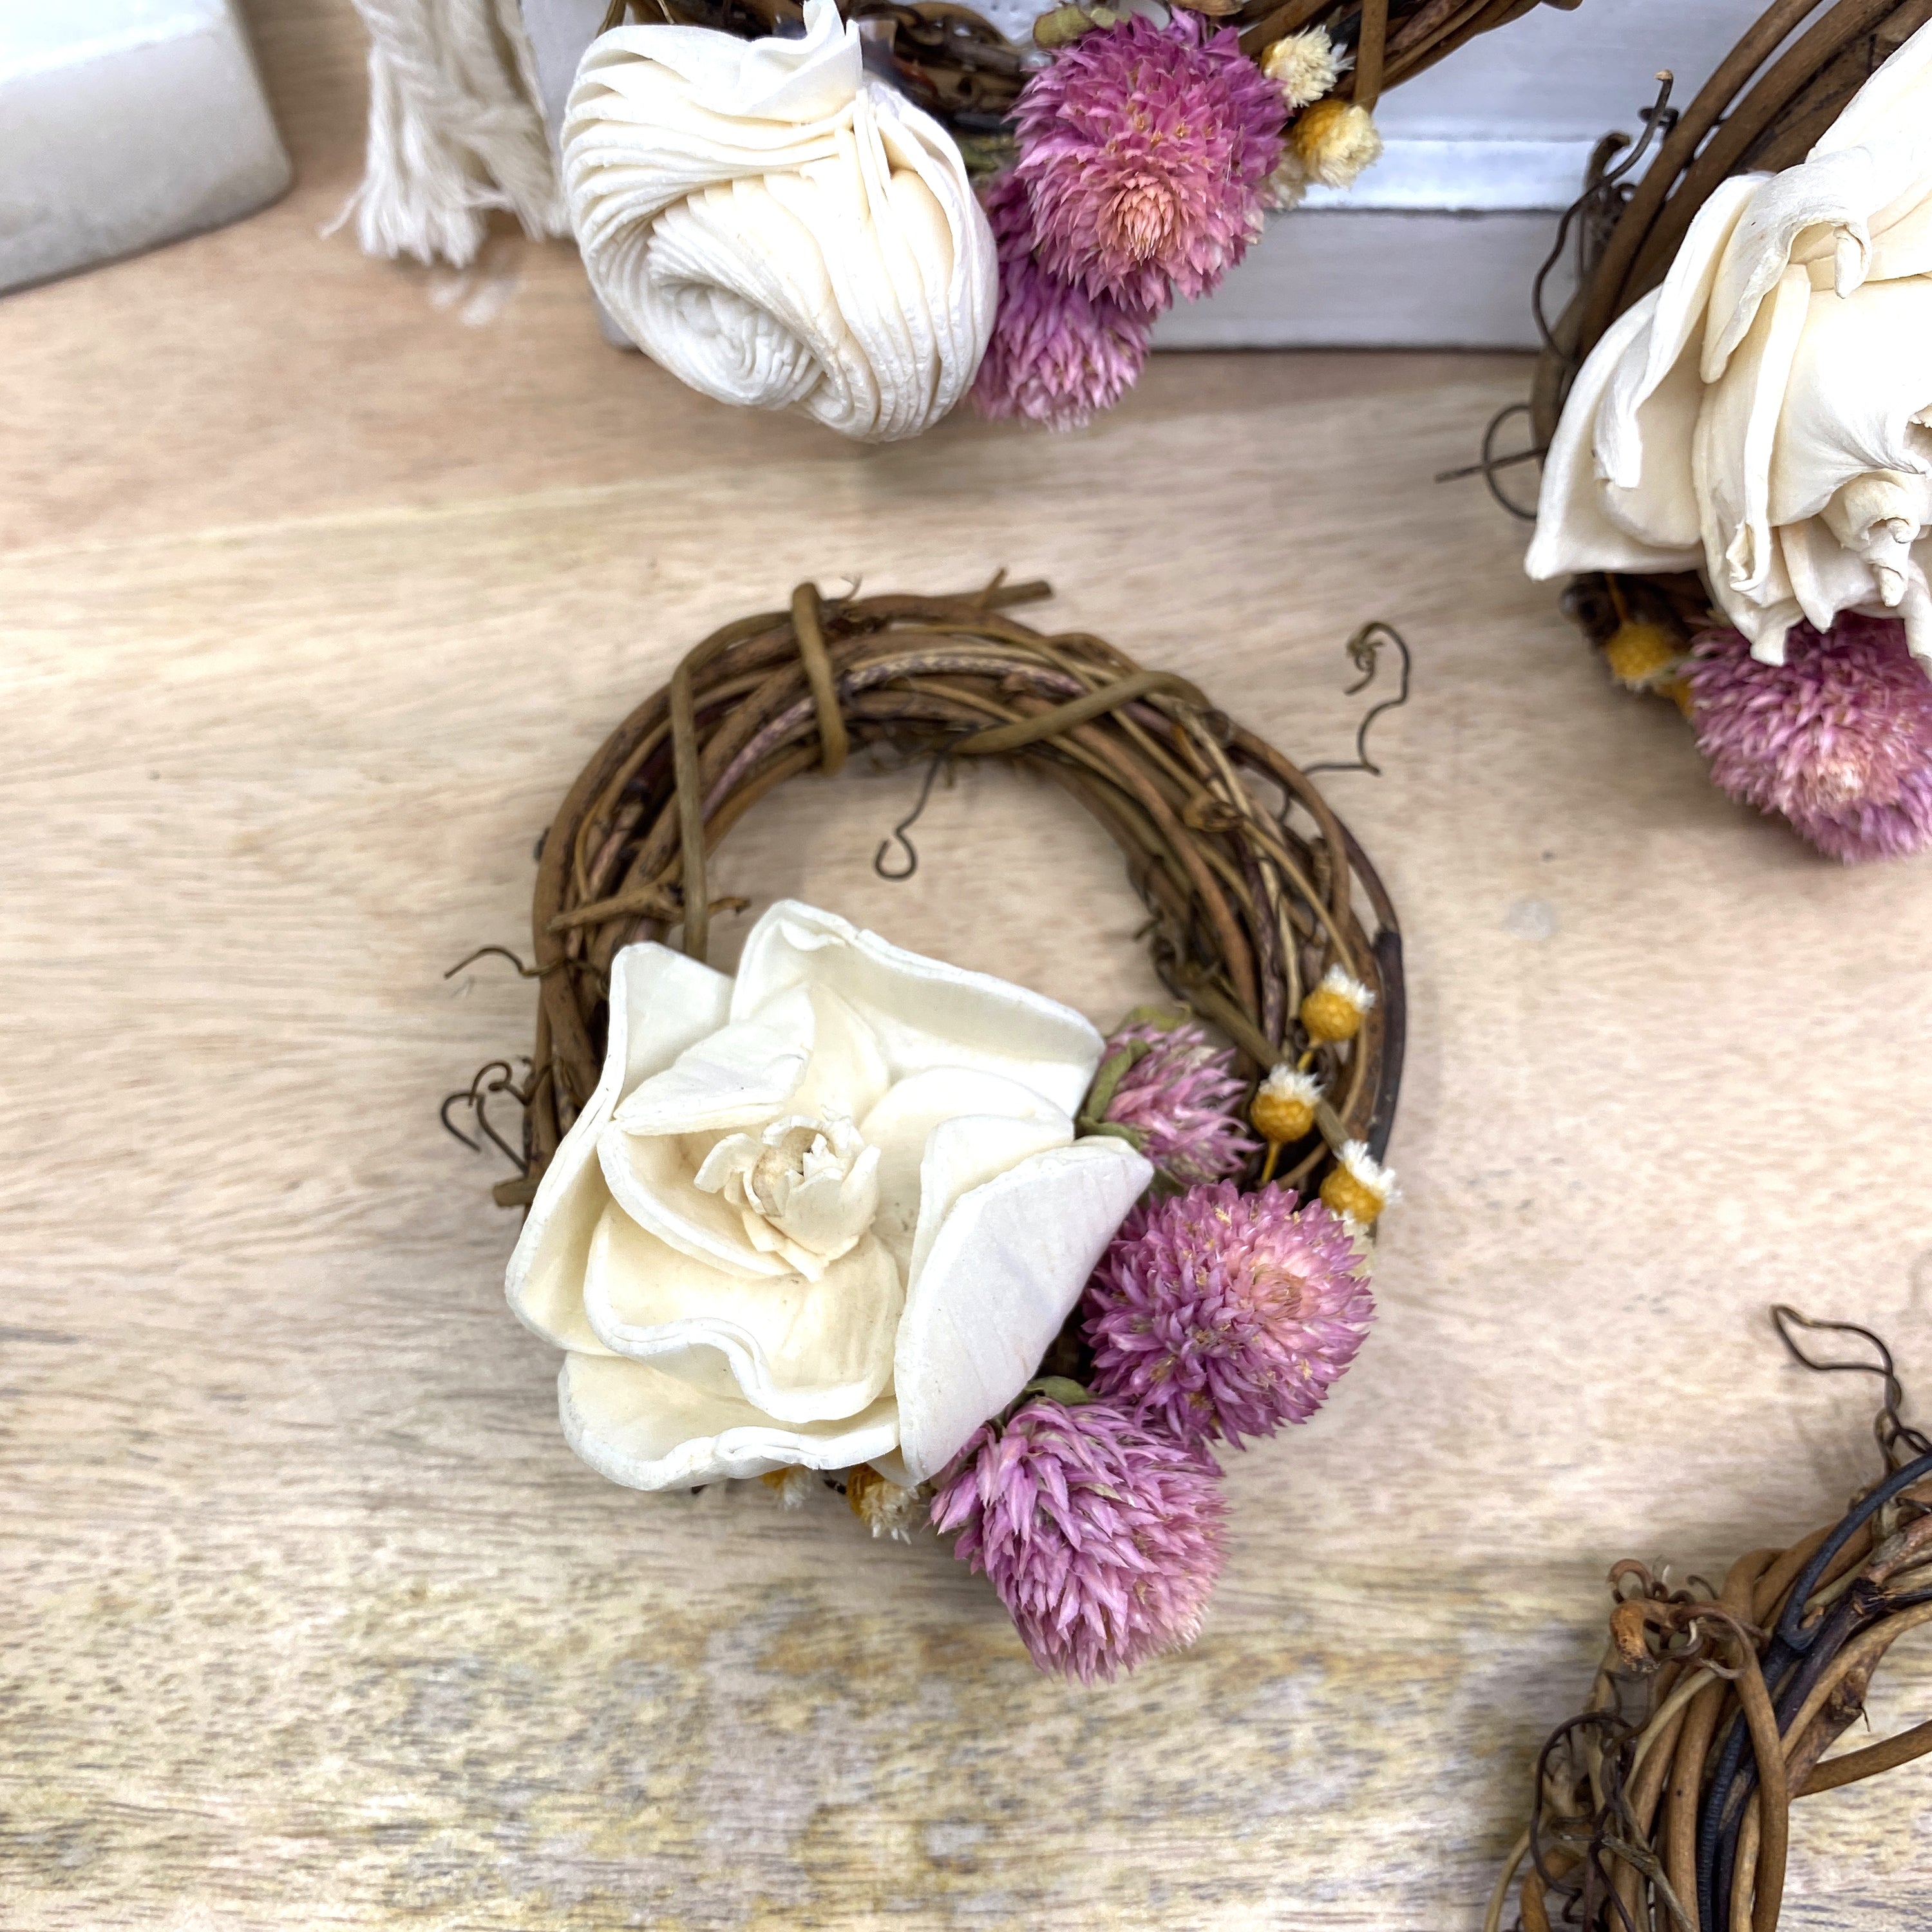 Mini Grapevine Wreath Ornaments with Dried Flowers, 3”